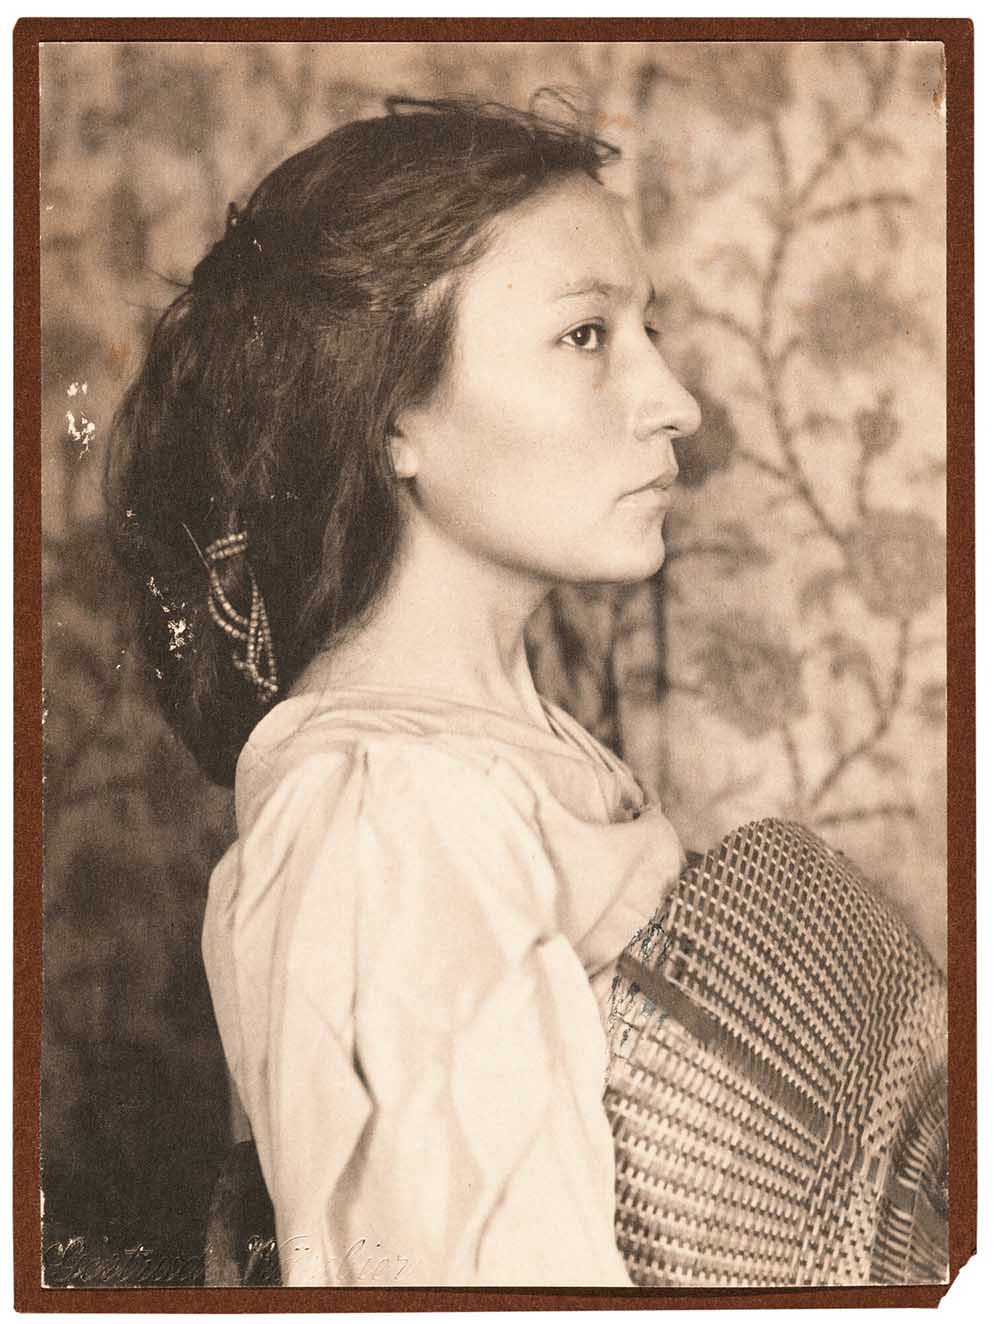 The Indigenous suffragist Gertrude Simmons Bonnin, also known as Zitkala-Sa, a citizen of the Yankton Sioux Tribe. After the ratification of the 19th Amendment, she reminded the rejoicing, newly enfranchised white women that the fight was not over. - Link - https://www.nytimes.com/2020/07/31/style/19th-amendment-native-womens-suffrage.html?referringSource=articleShare